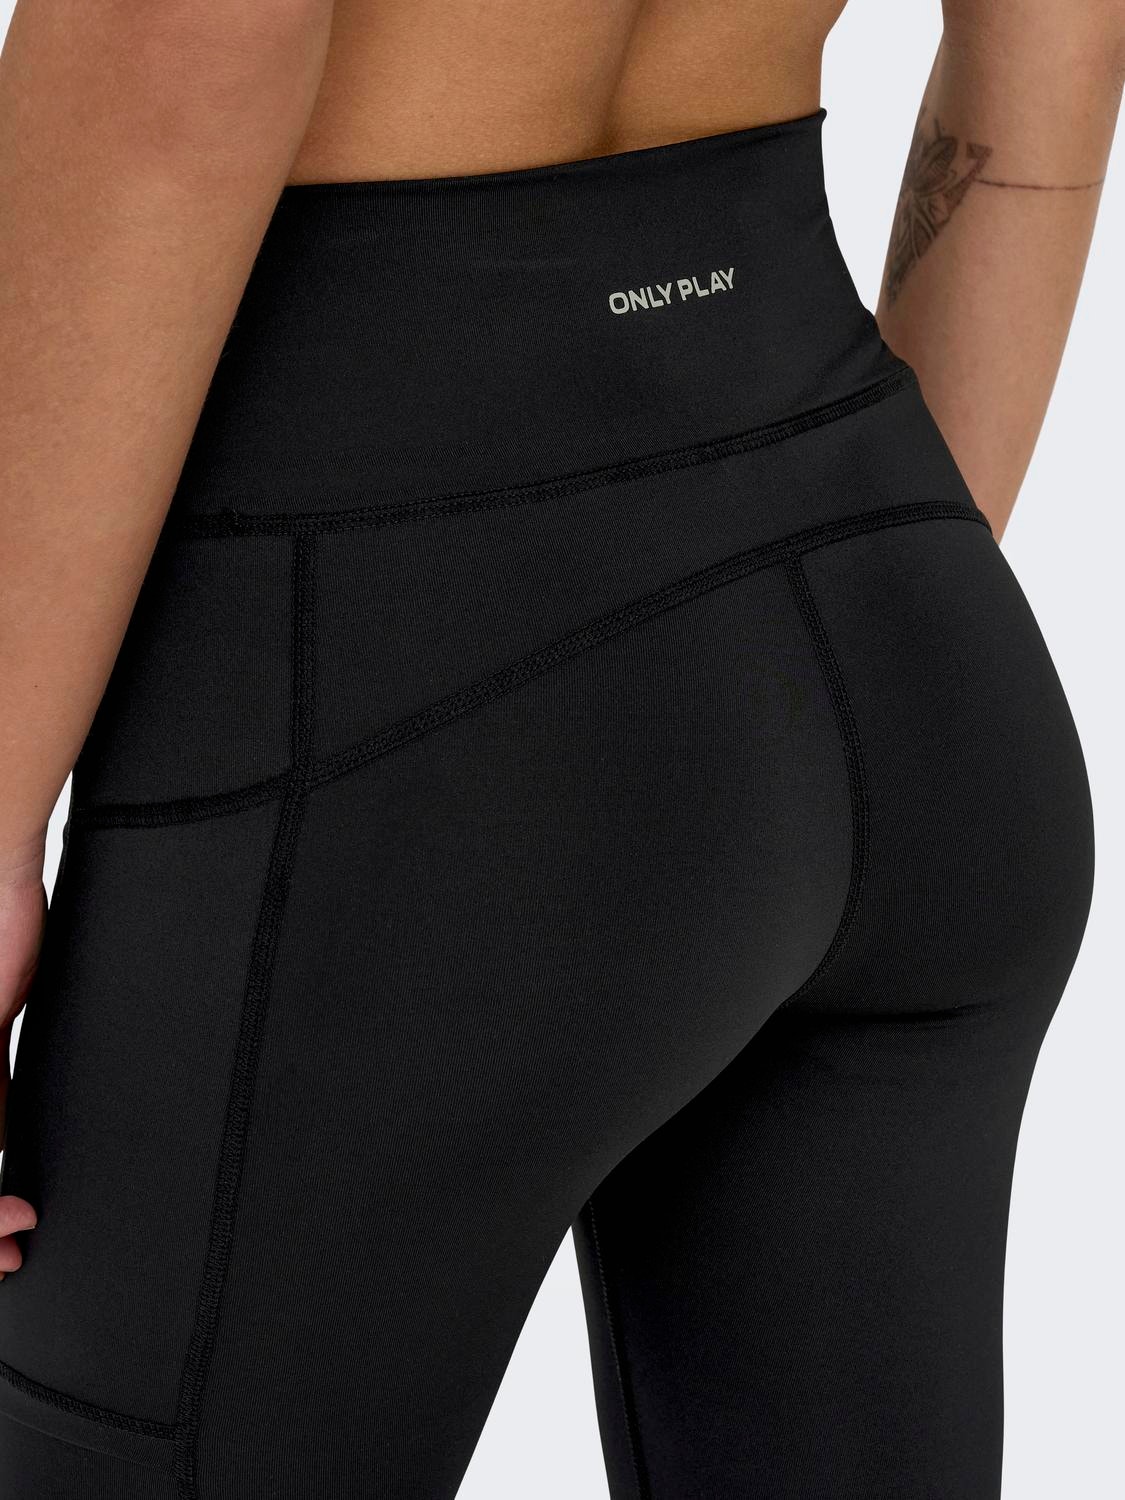 ONLY PLAY Black High Waist Exposed Seam Sports Leggings